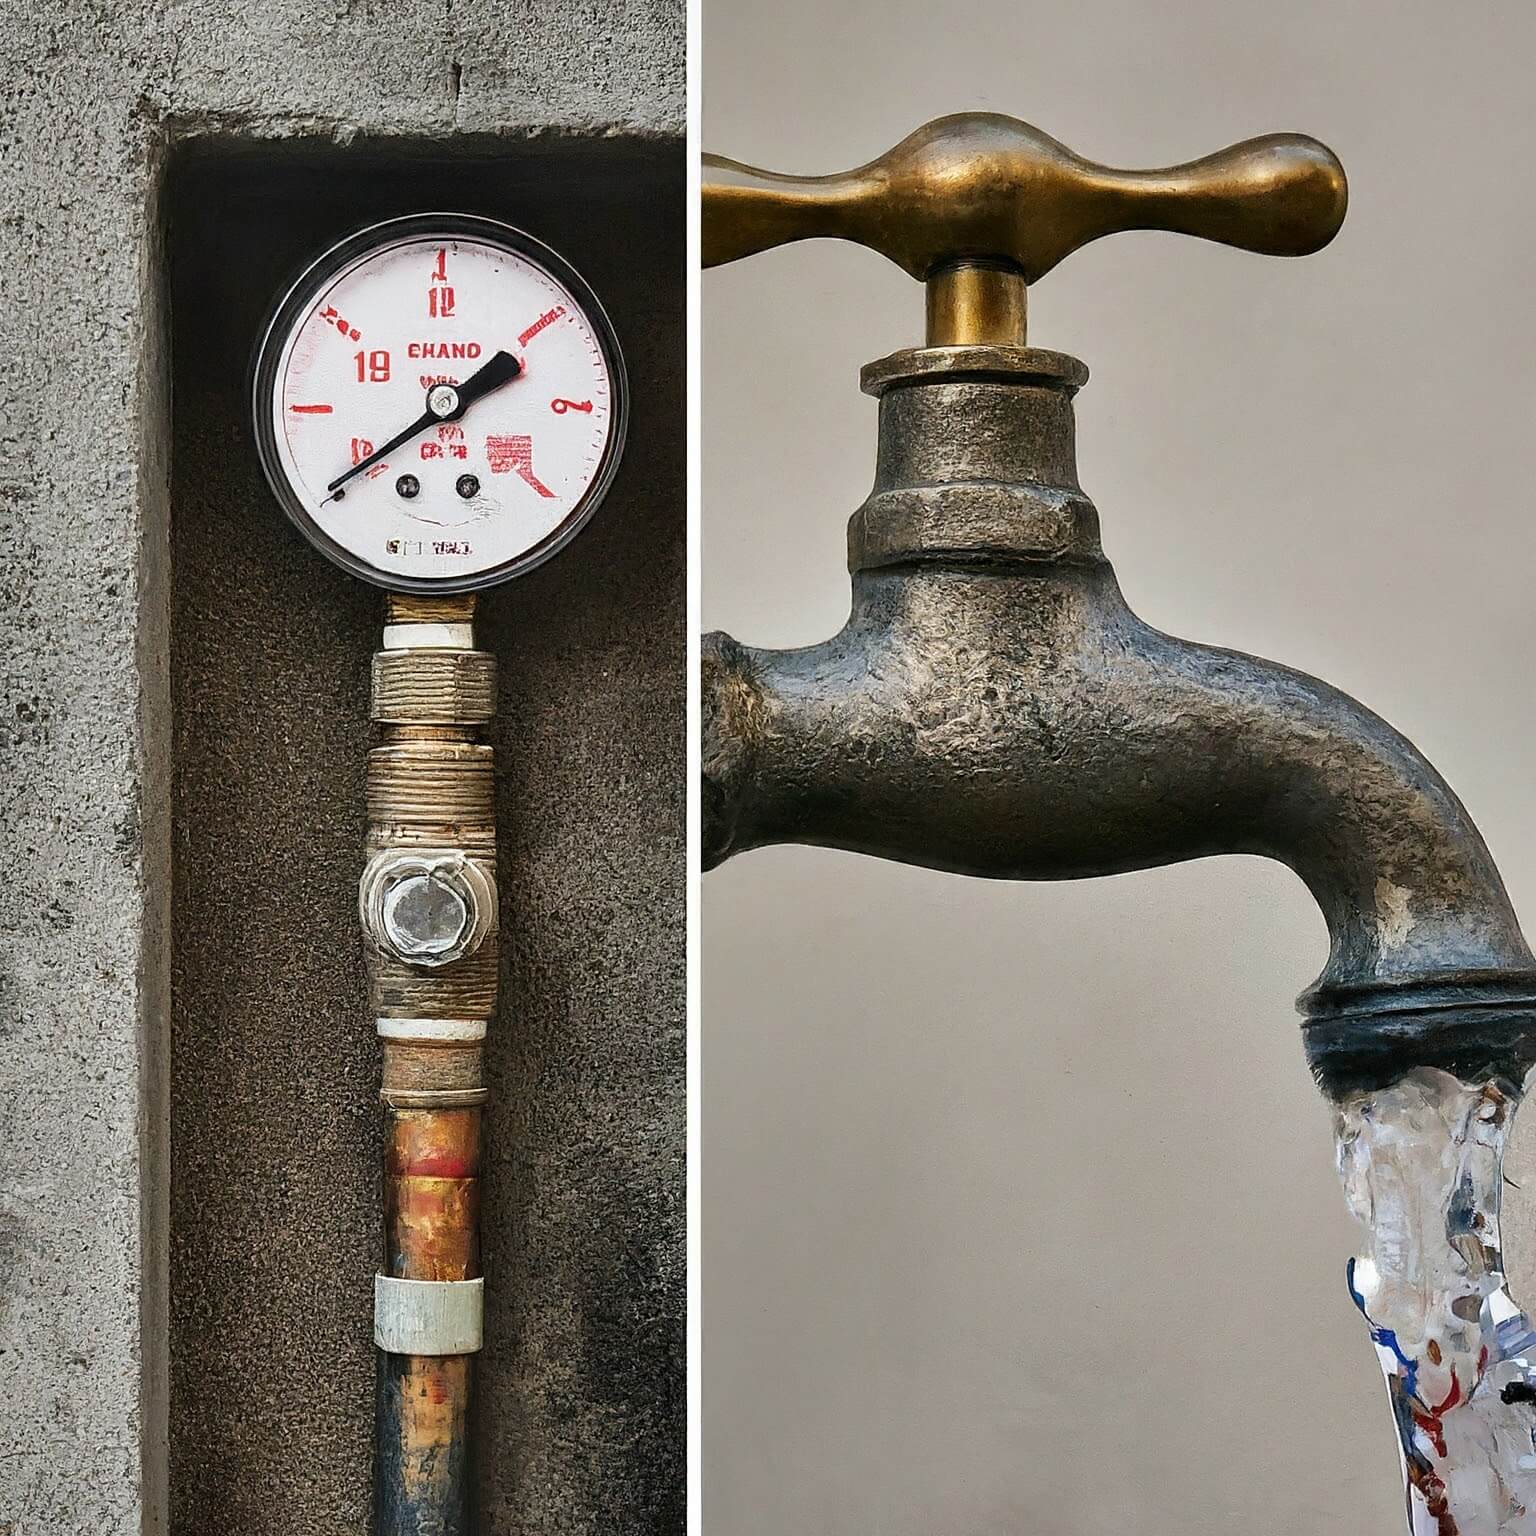 Two pictures of a water tap and a water pressure gauge.